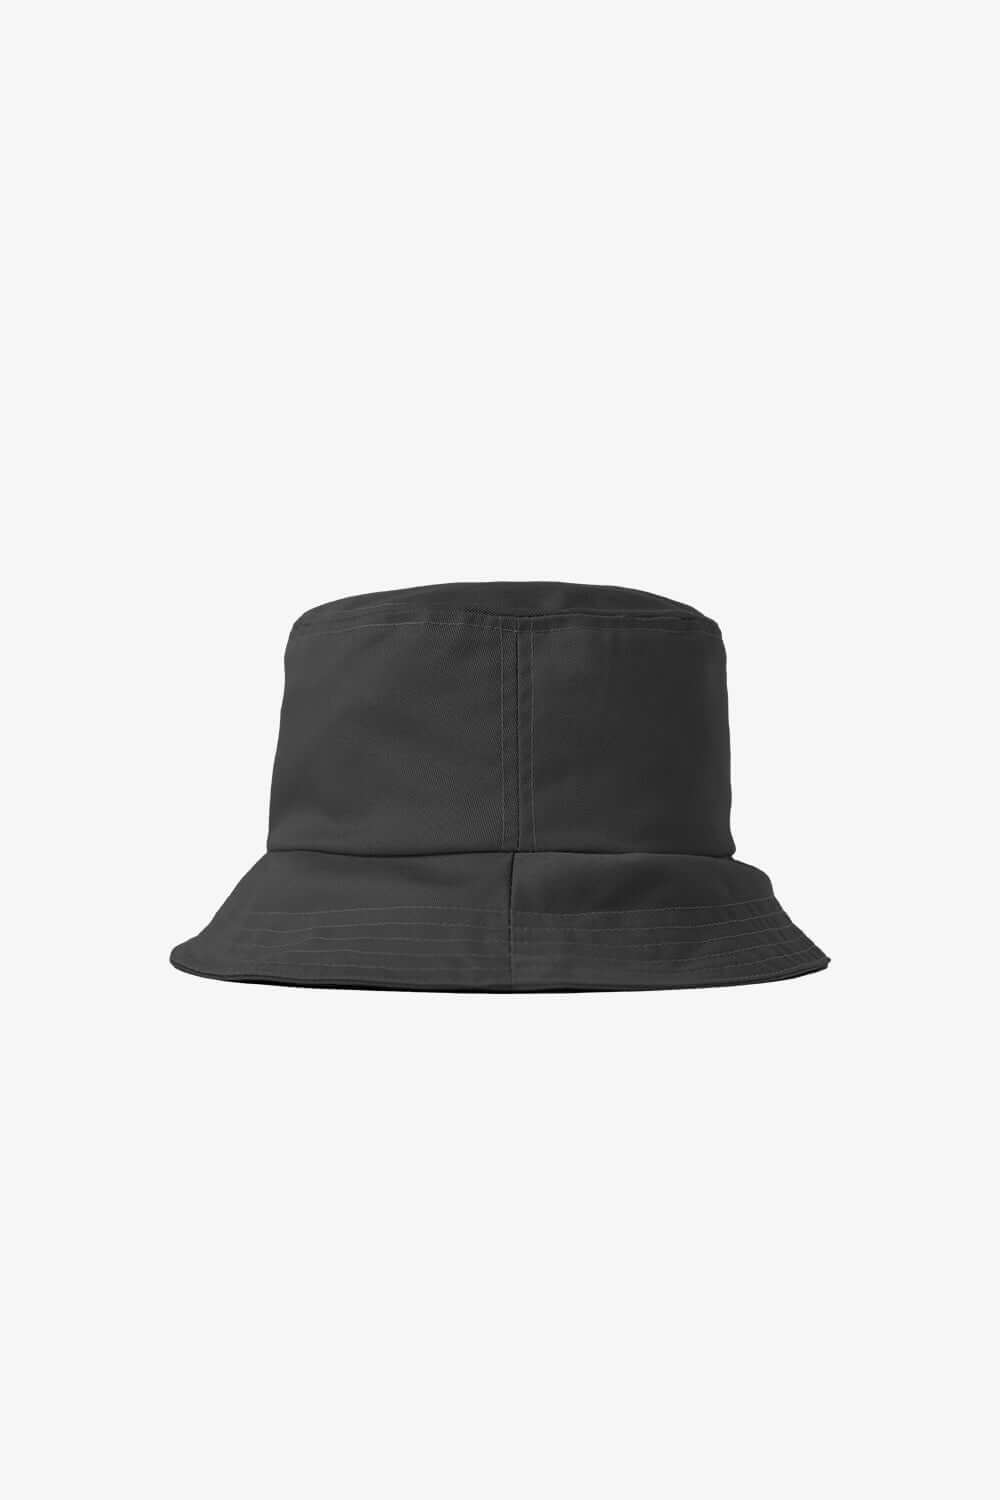 DIY Do It Yourself Sewing Kit for Fashionable Clothes Black Bucket Hat